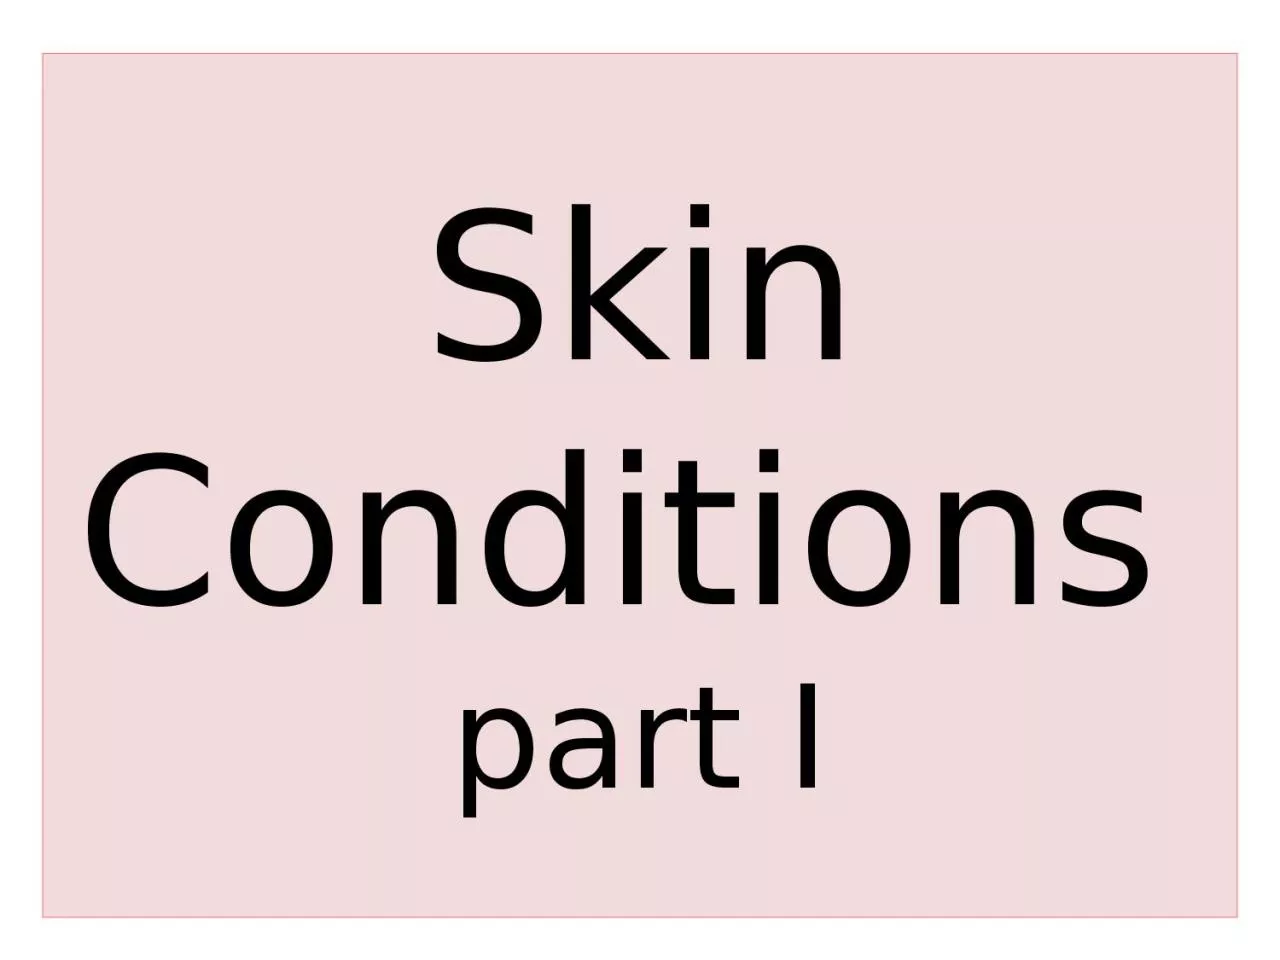 Skin   Conditions   part I